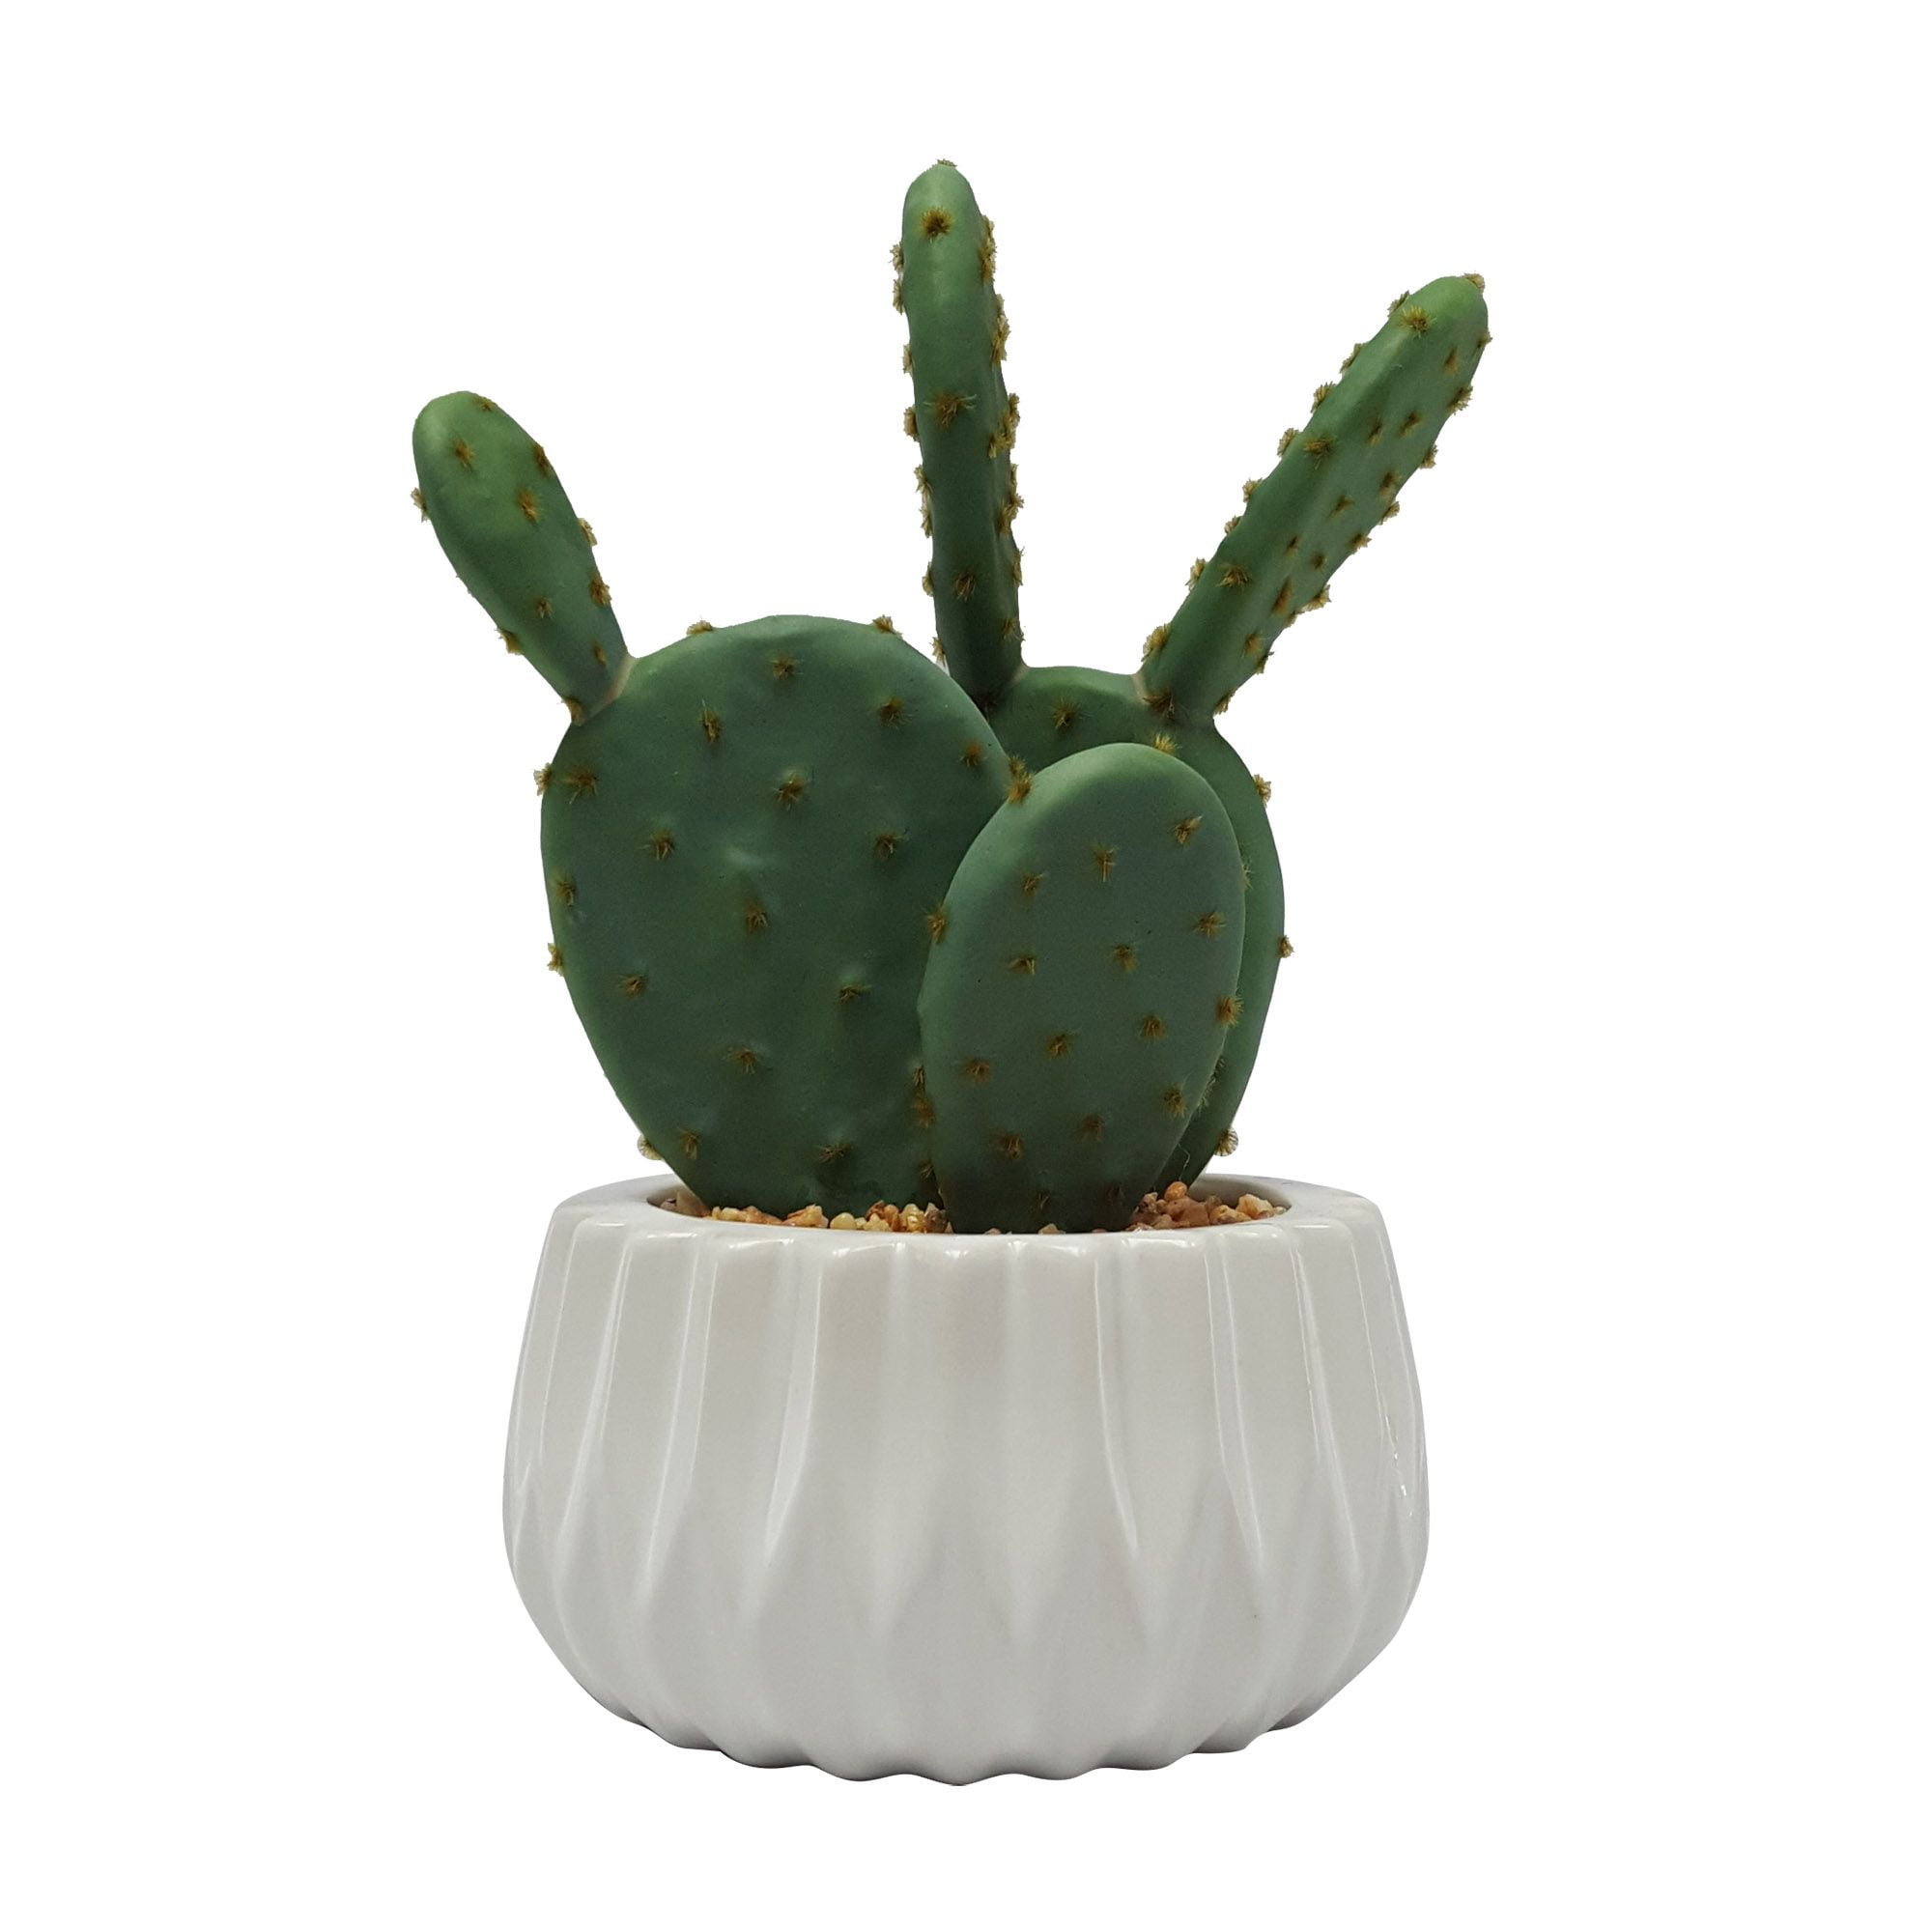 Details about   Fake Artificial Succulent Potted Plants Desert Cactus Prickly 